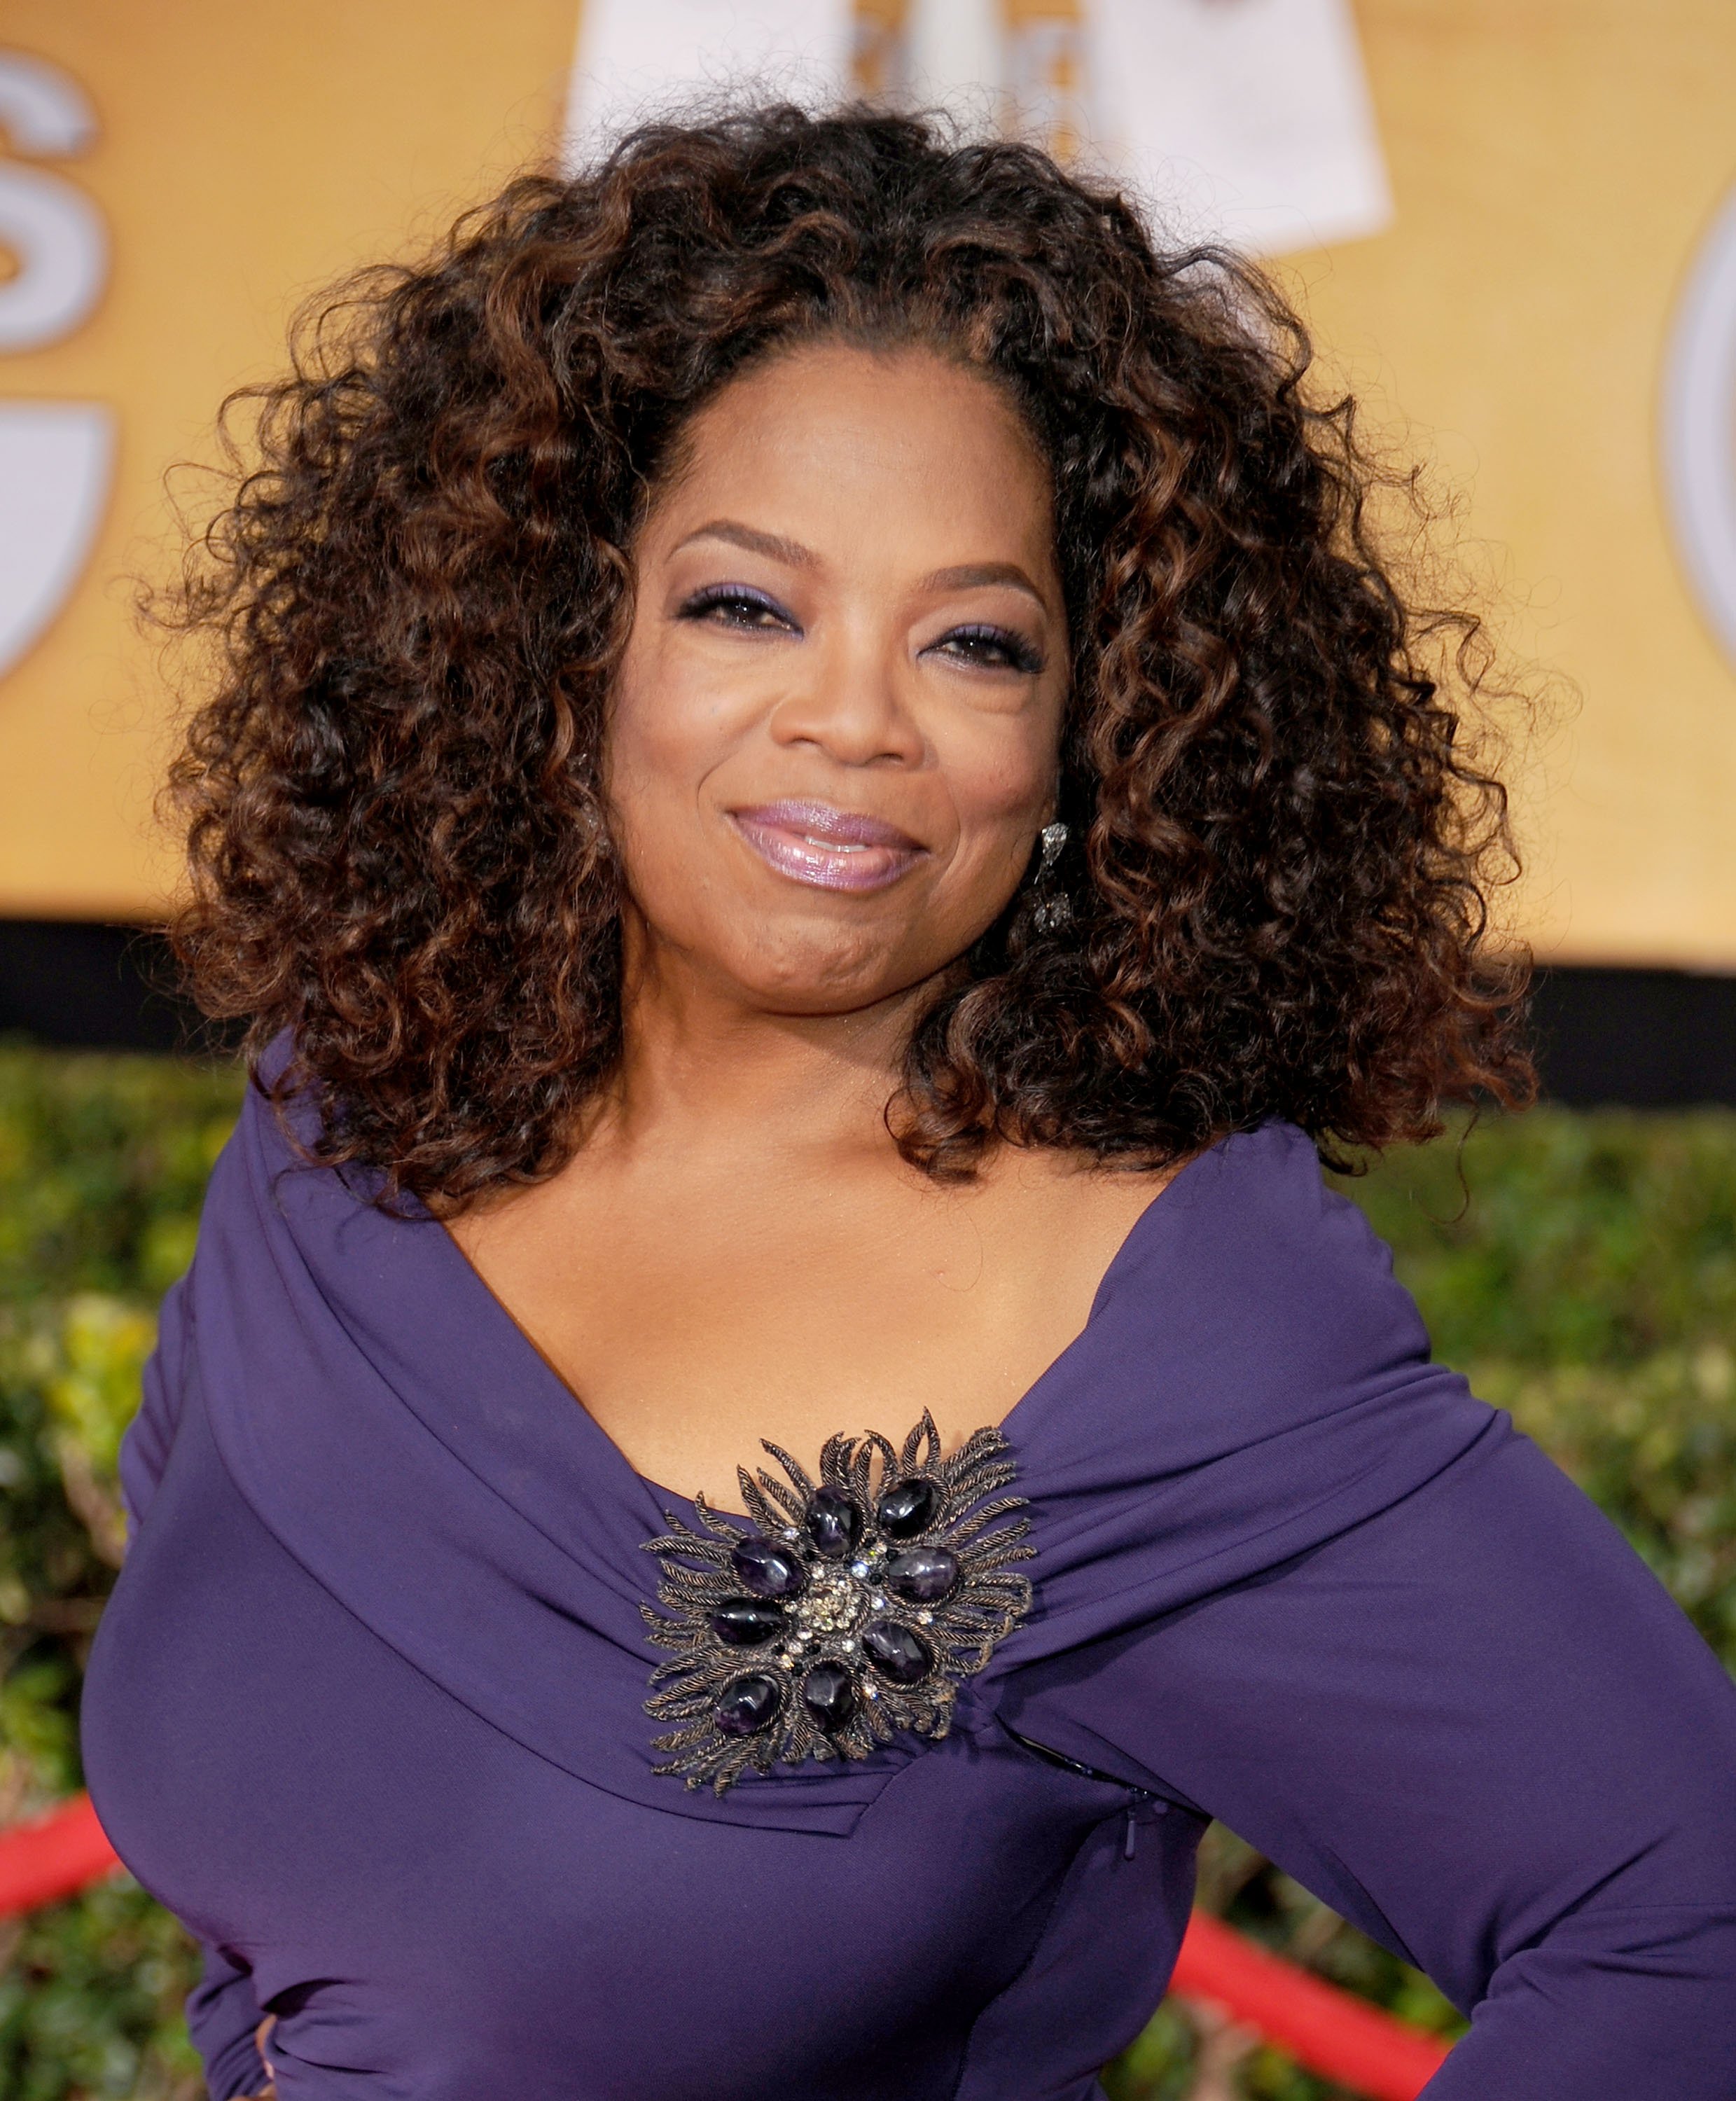 Oprah Winfrey arrives at the 20th Annual Screen Actors Guild Awards at The Shrine Auditorium on January 18, 2014 in Los Angeles, California. | Source: Getty Images